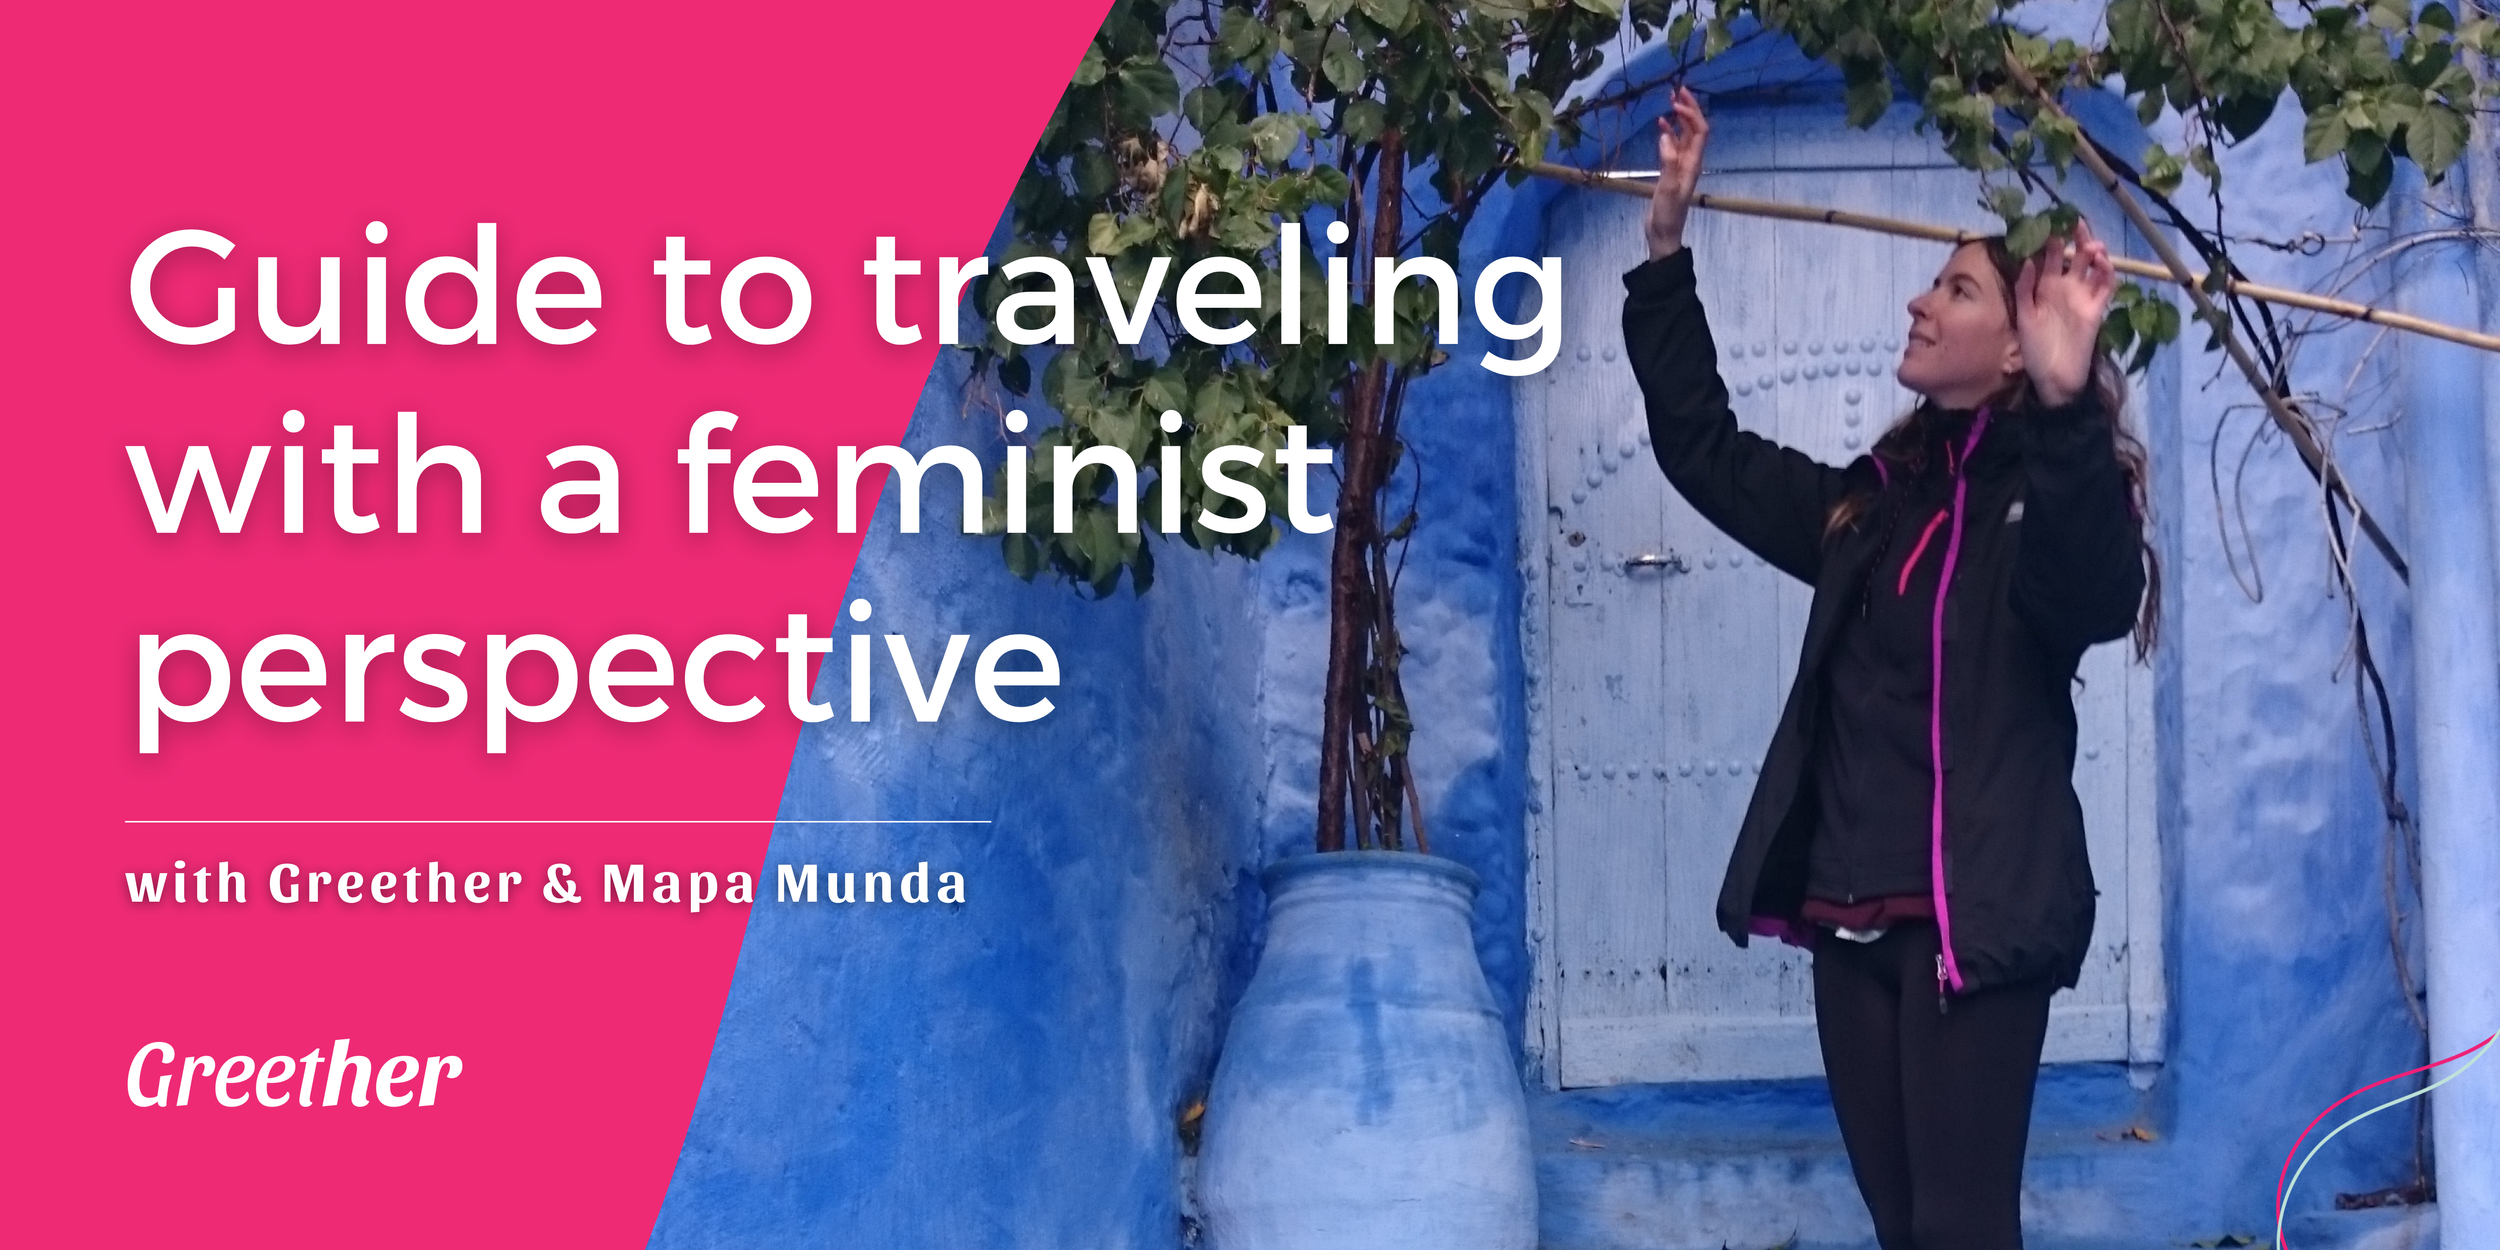 Guide to traveling with a feminist perspective